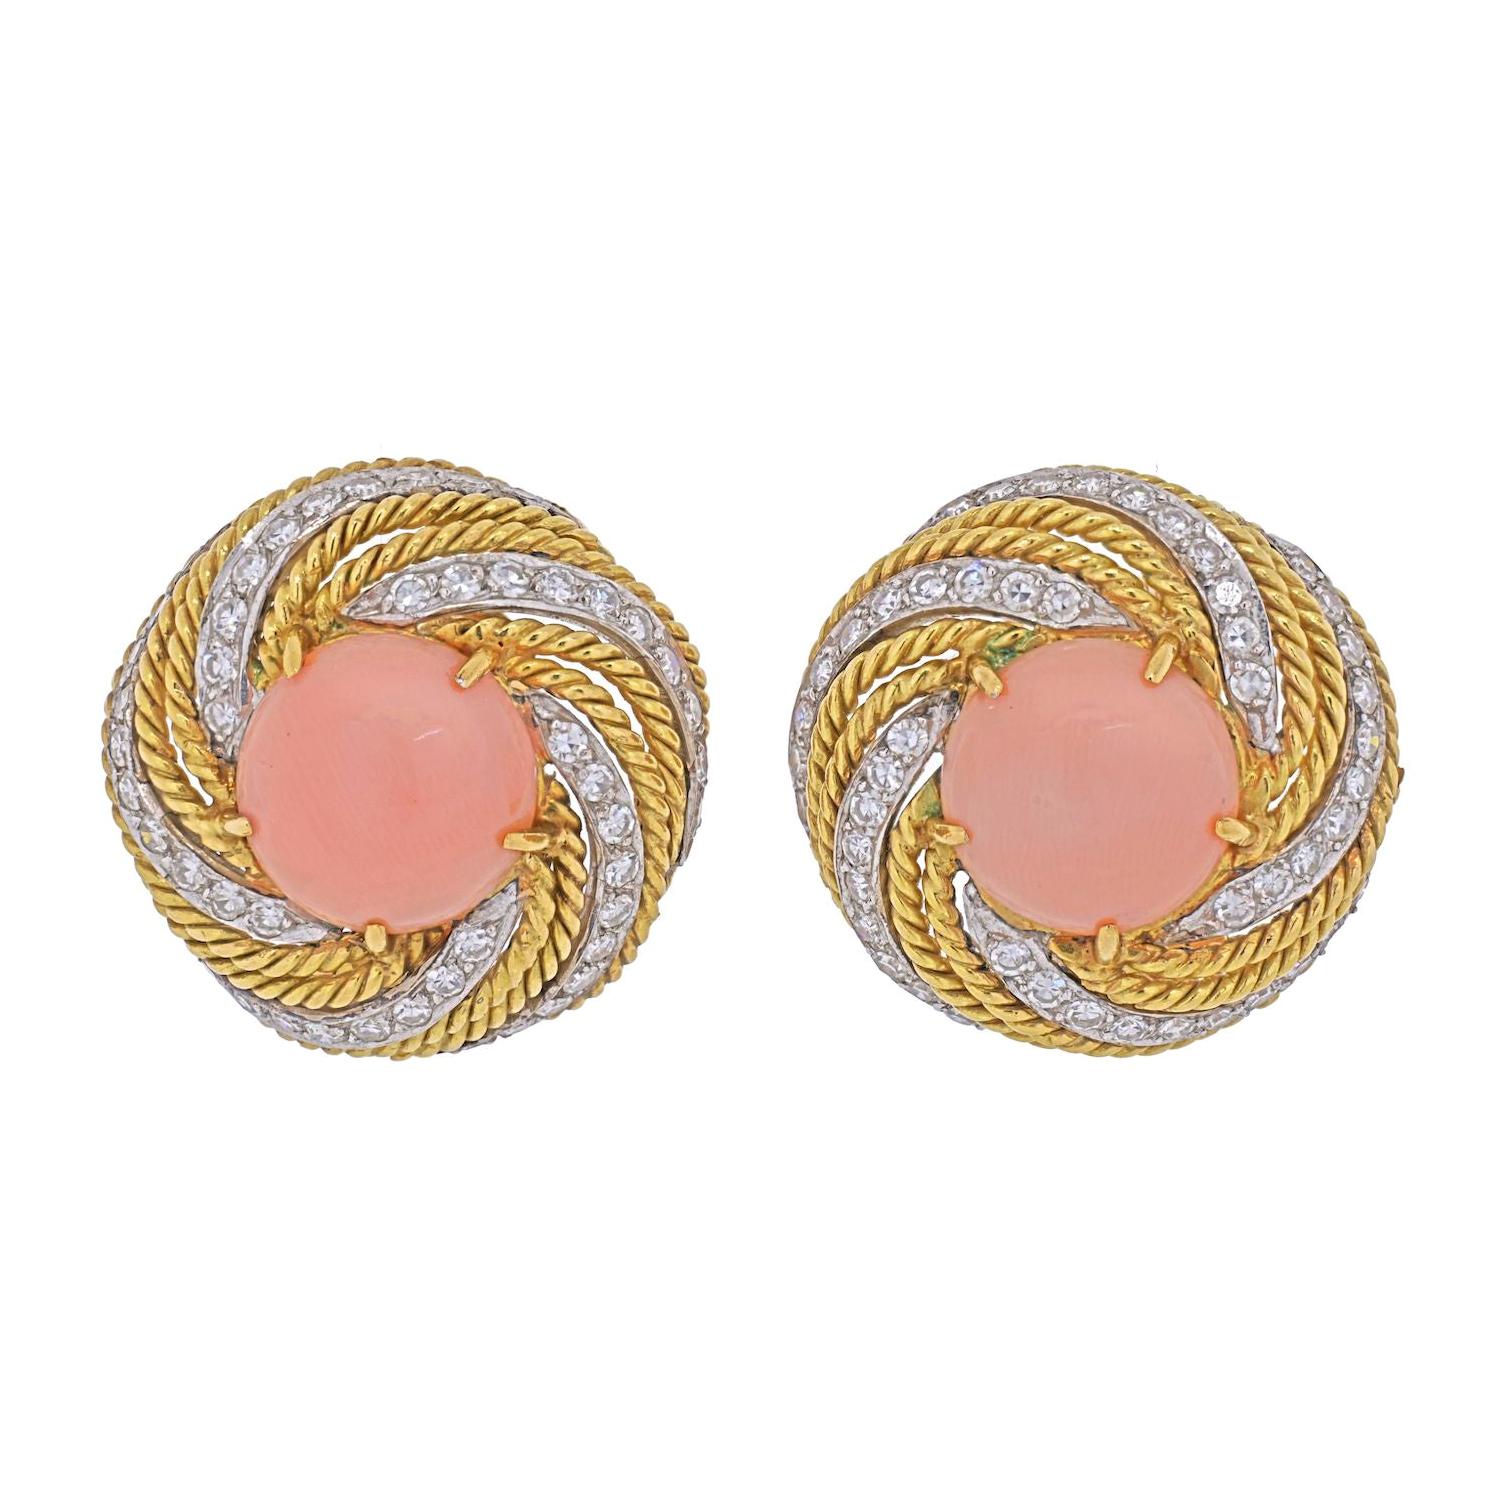 Vourakis 18K Yellow Gold Light Pink Coral Earrings